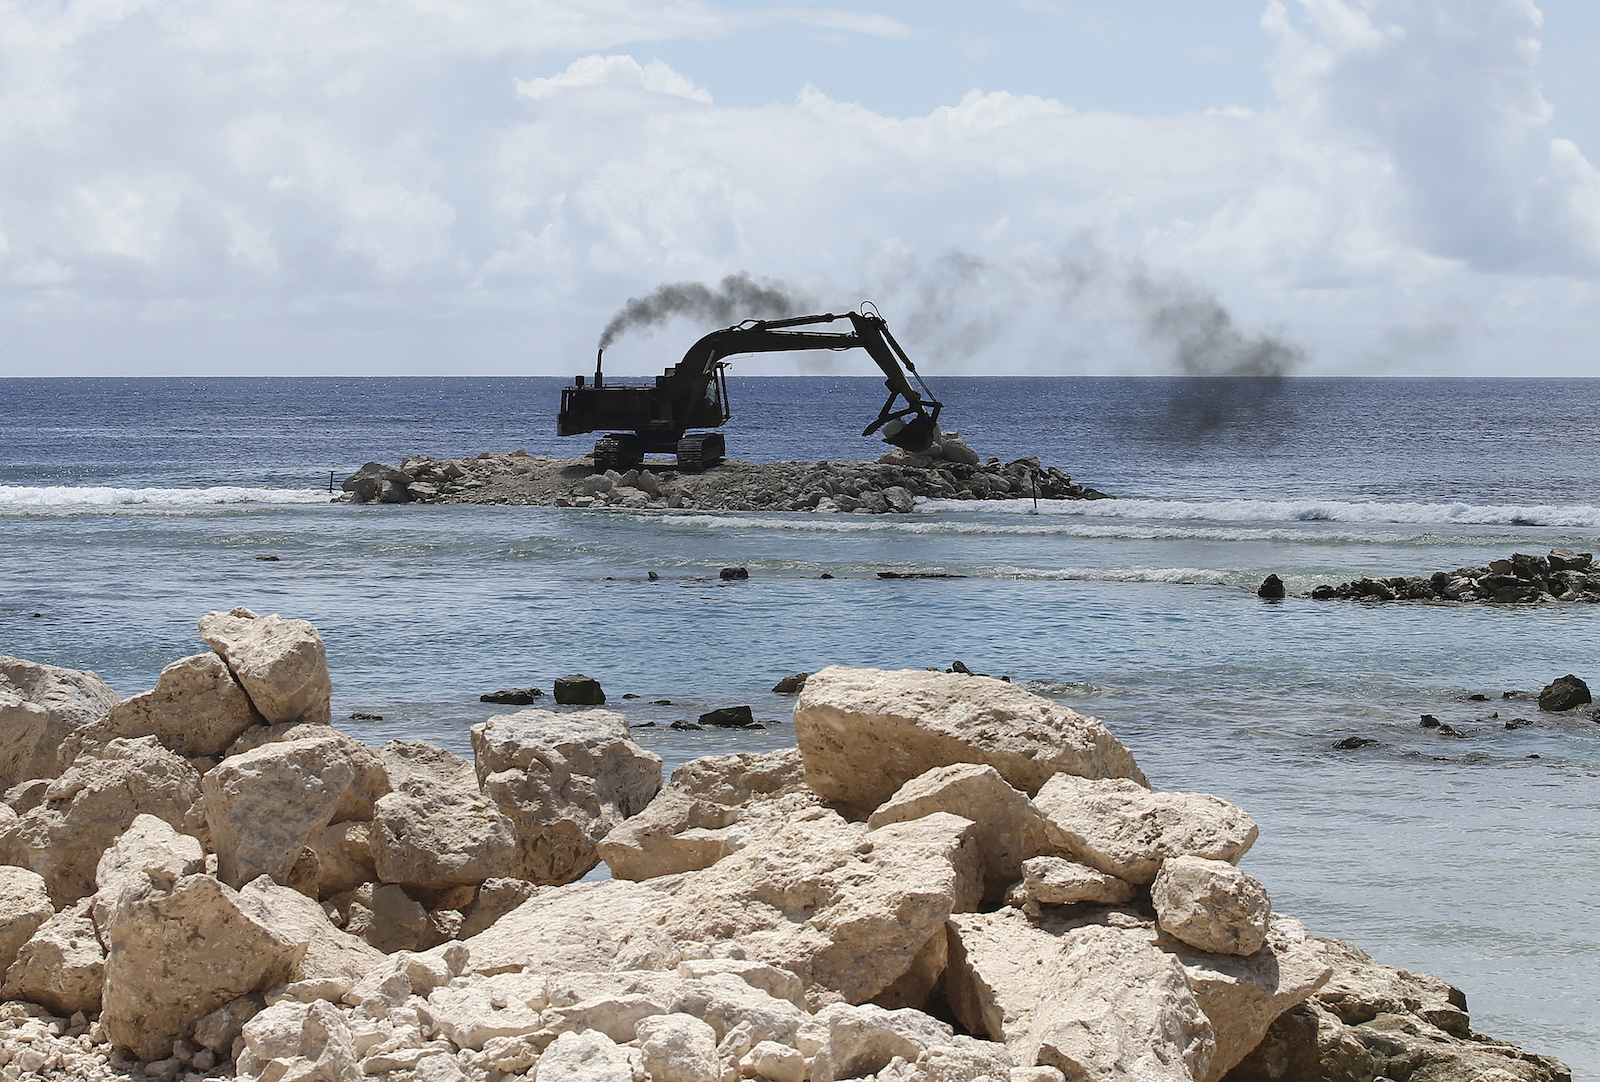 An exxcavator sits on a shallow part of the ocean with rocks in the foreground